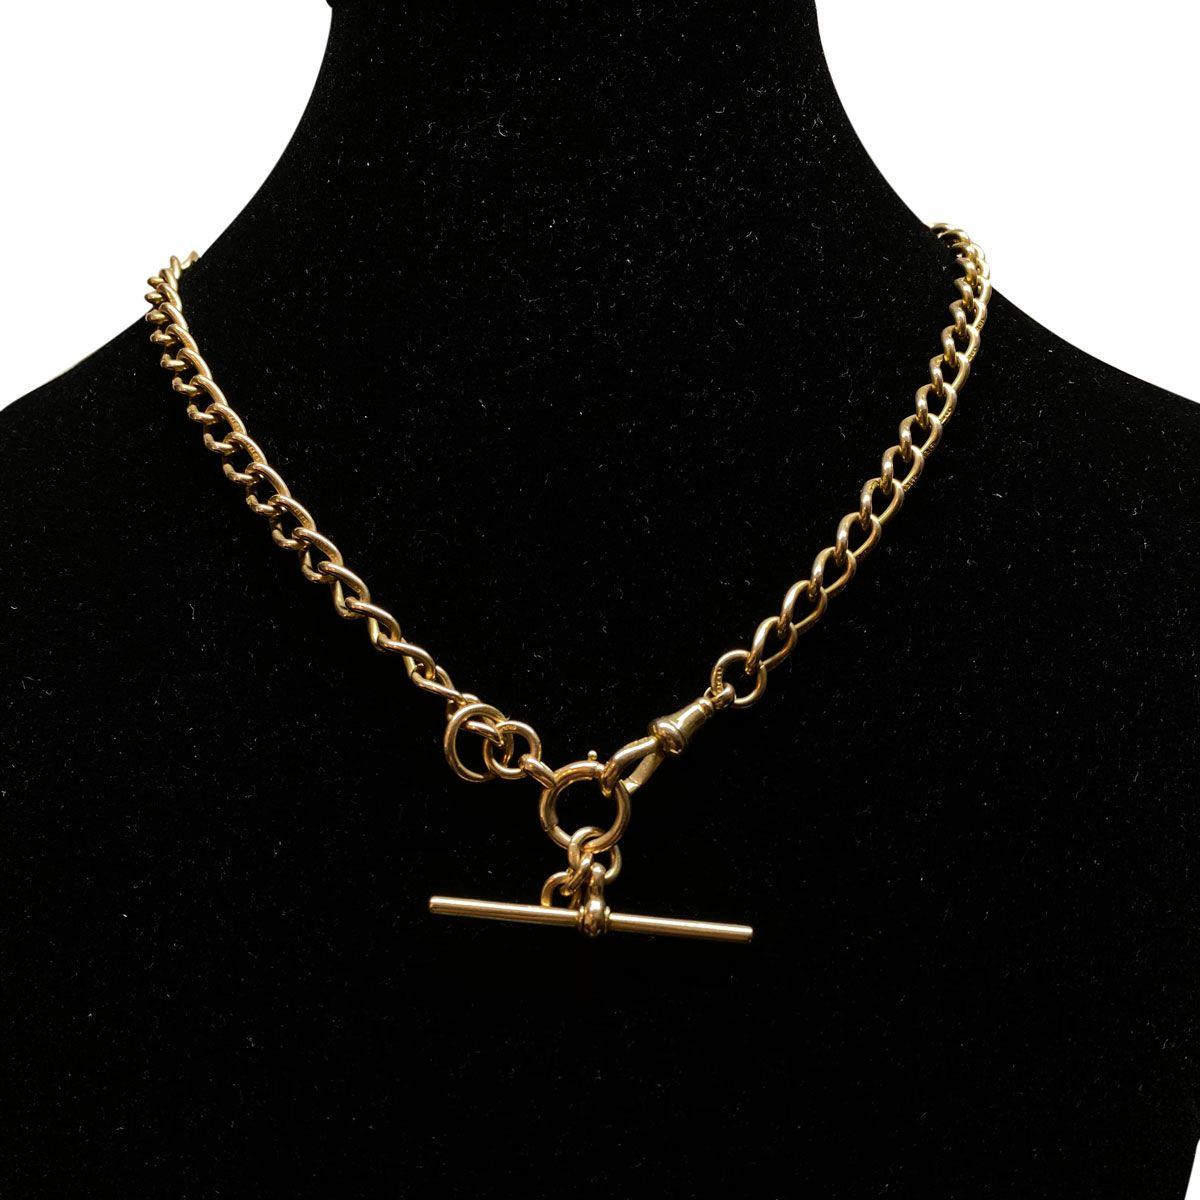 Women's 15 Karat Yellow Gold English Fob Curb Link Chain Necklace